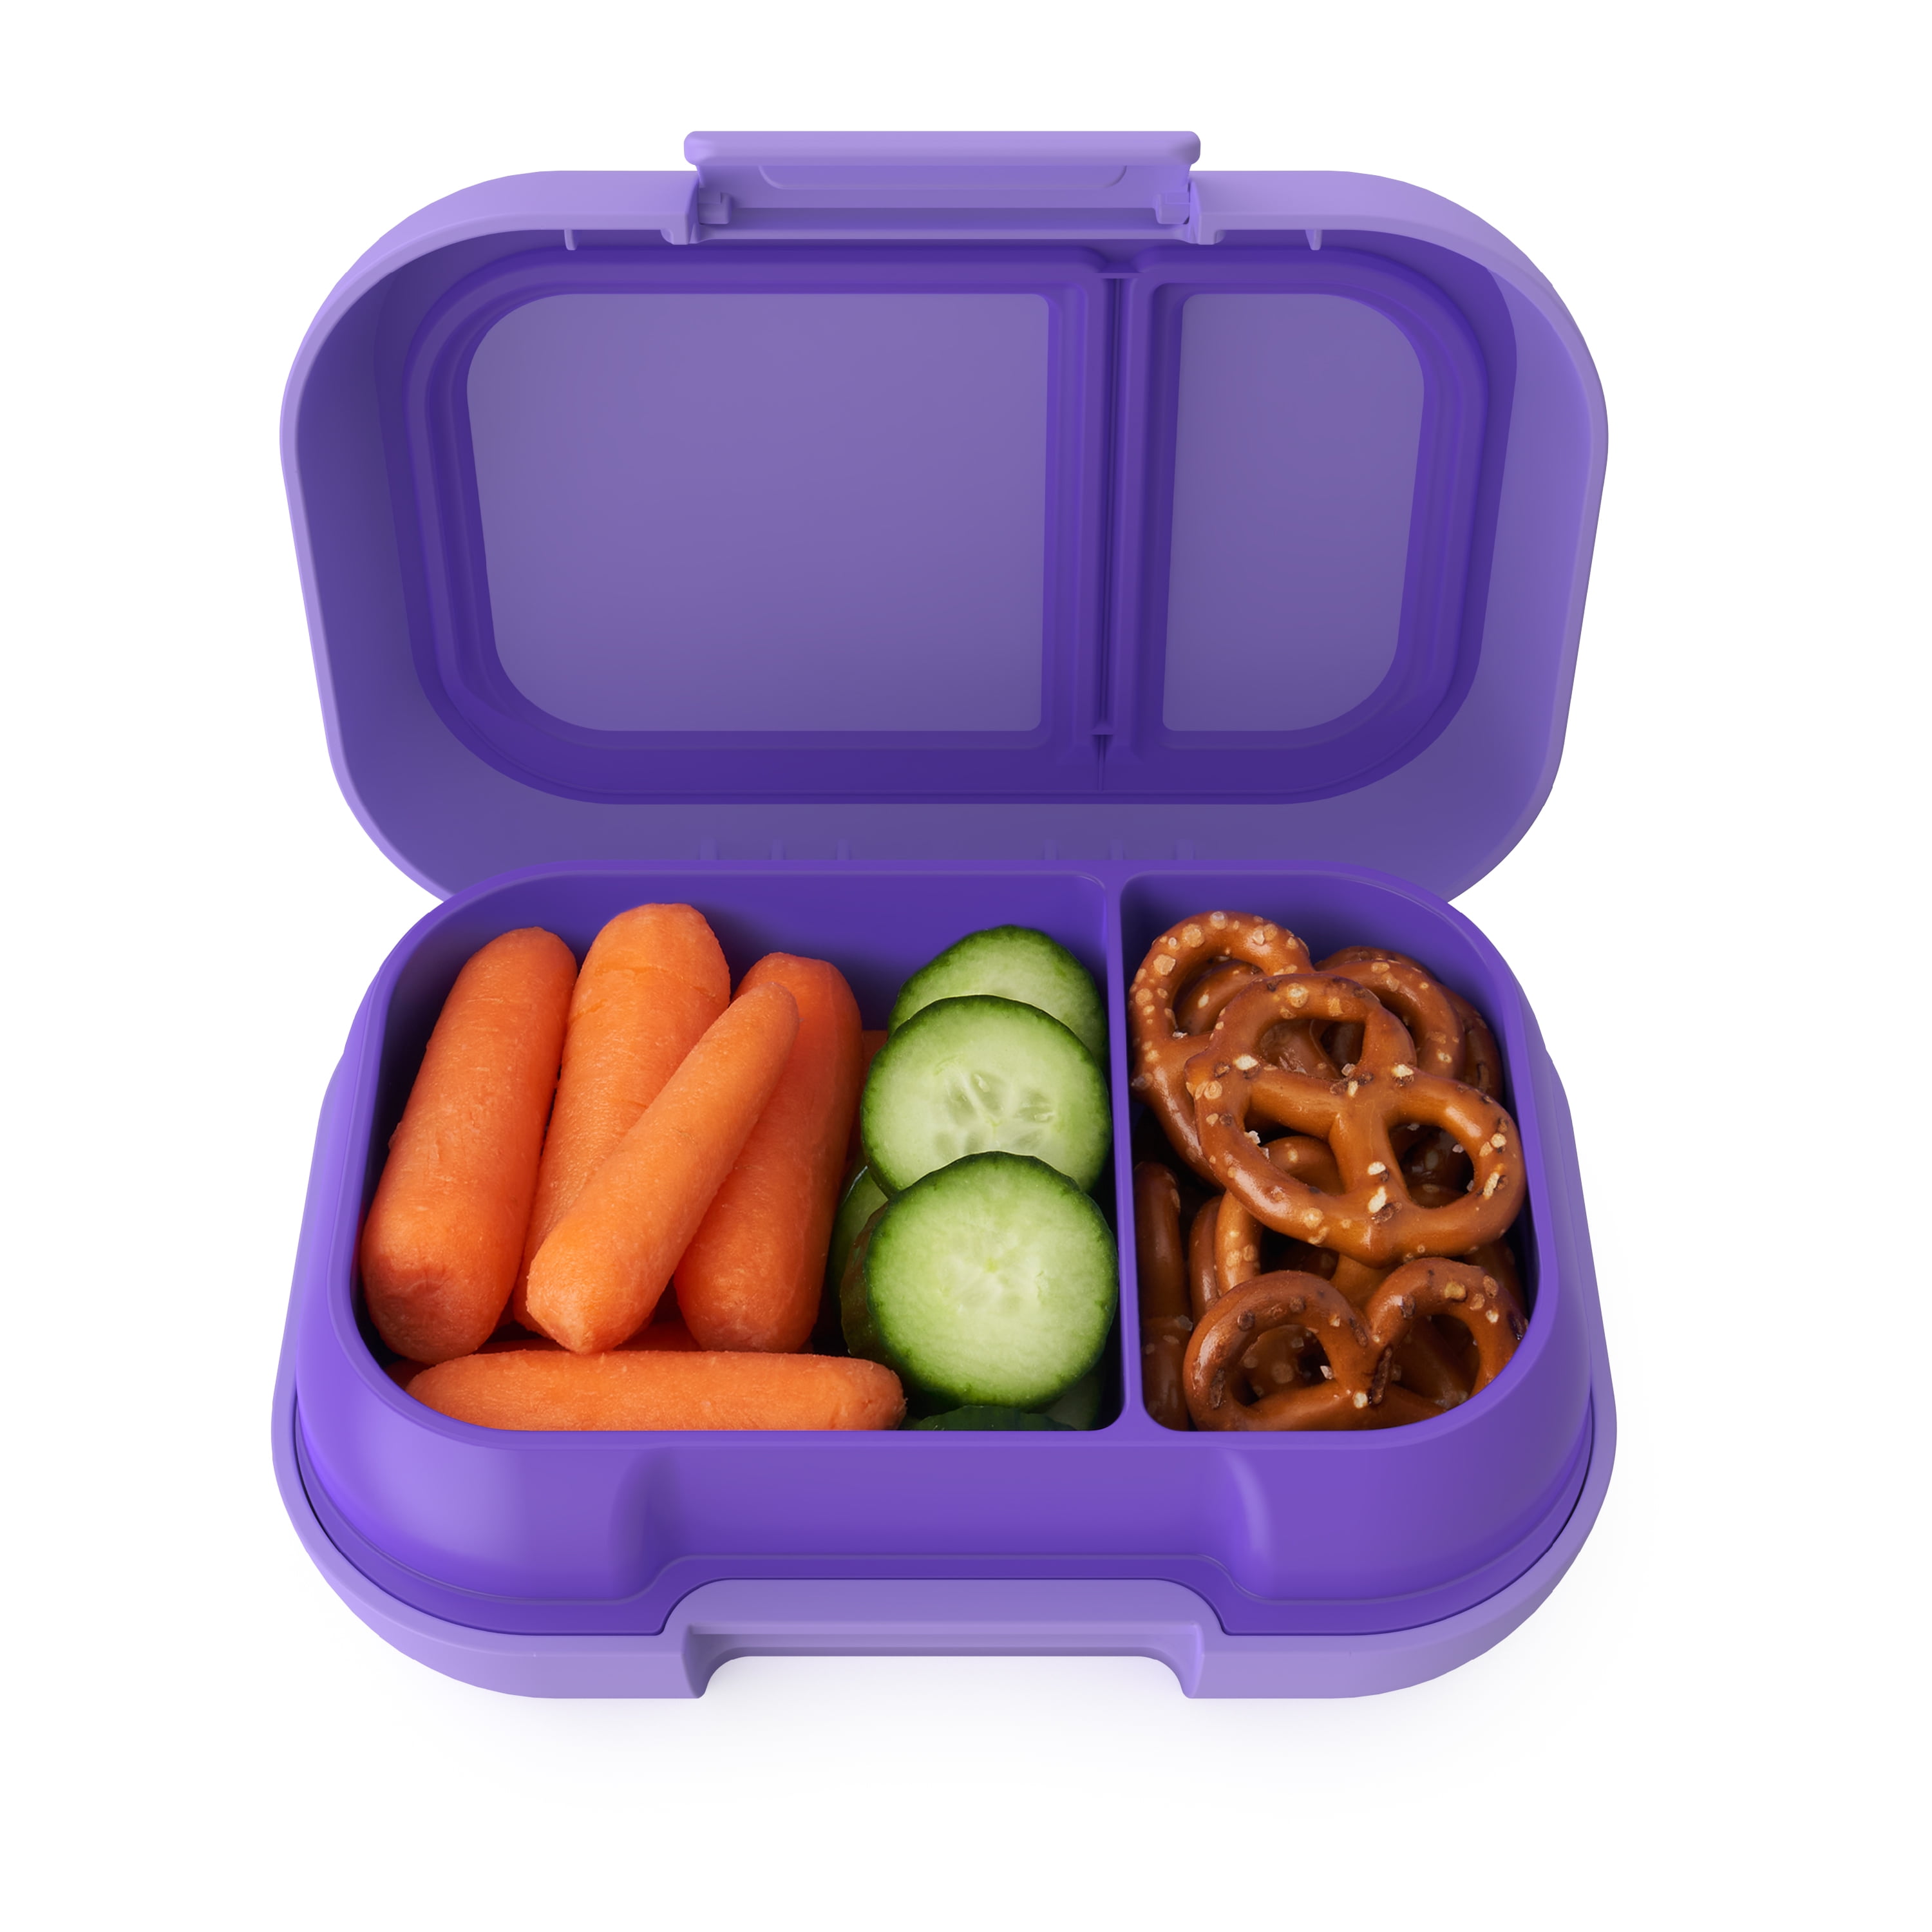 Bentgo® 2-Compartment Containers